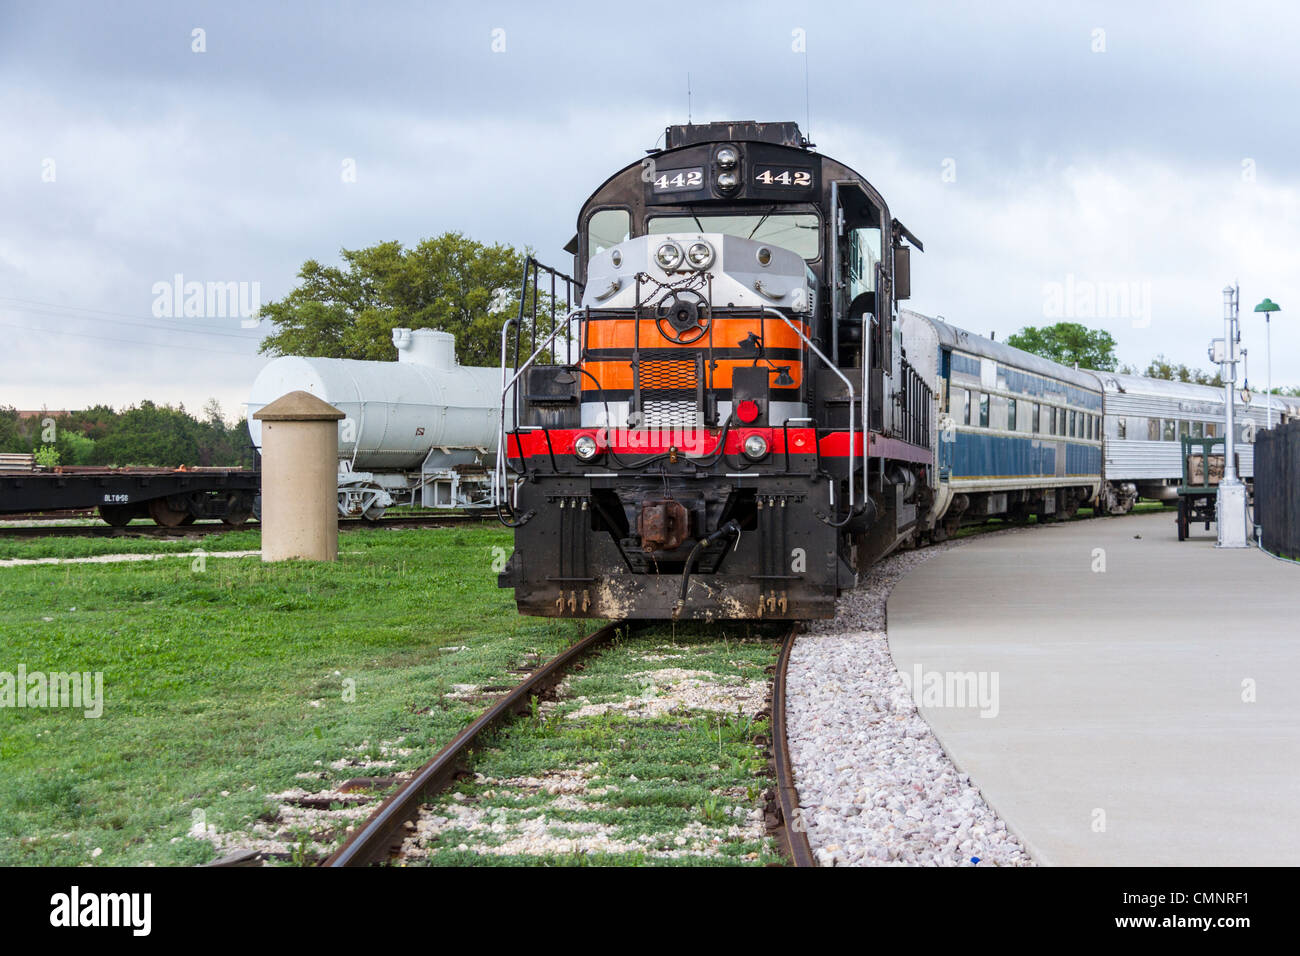 1960 Alco diesel locomotive engine number 442 in active service at Austin & Texas Central Railroad in Austin, Texas. Stock Photo